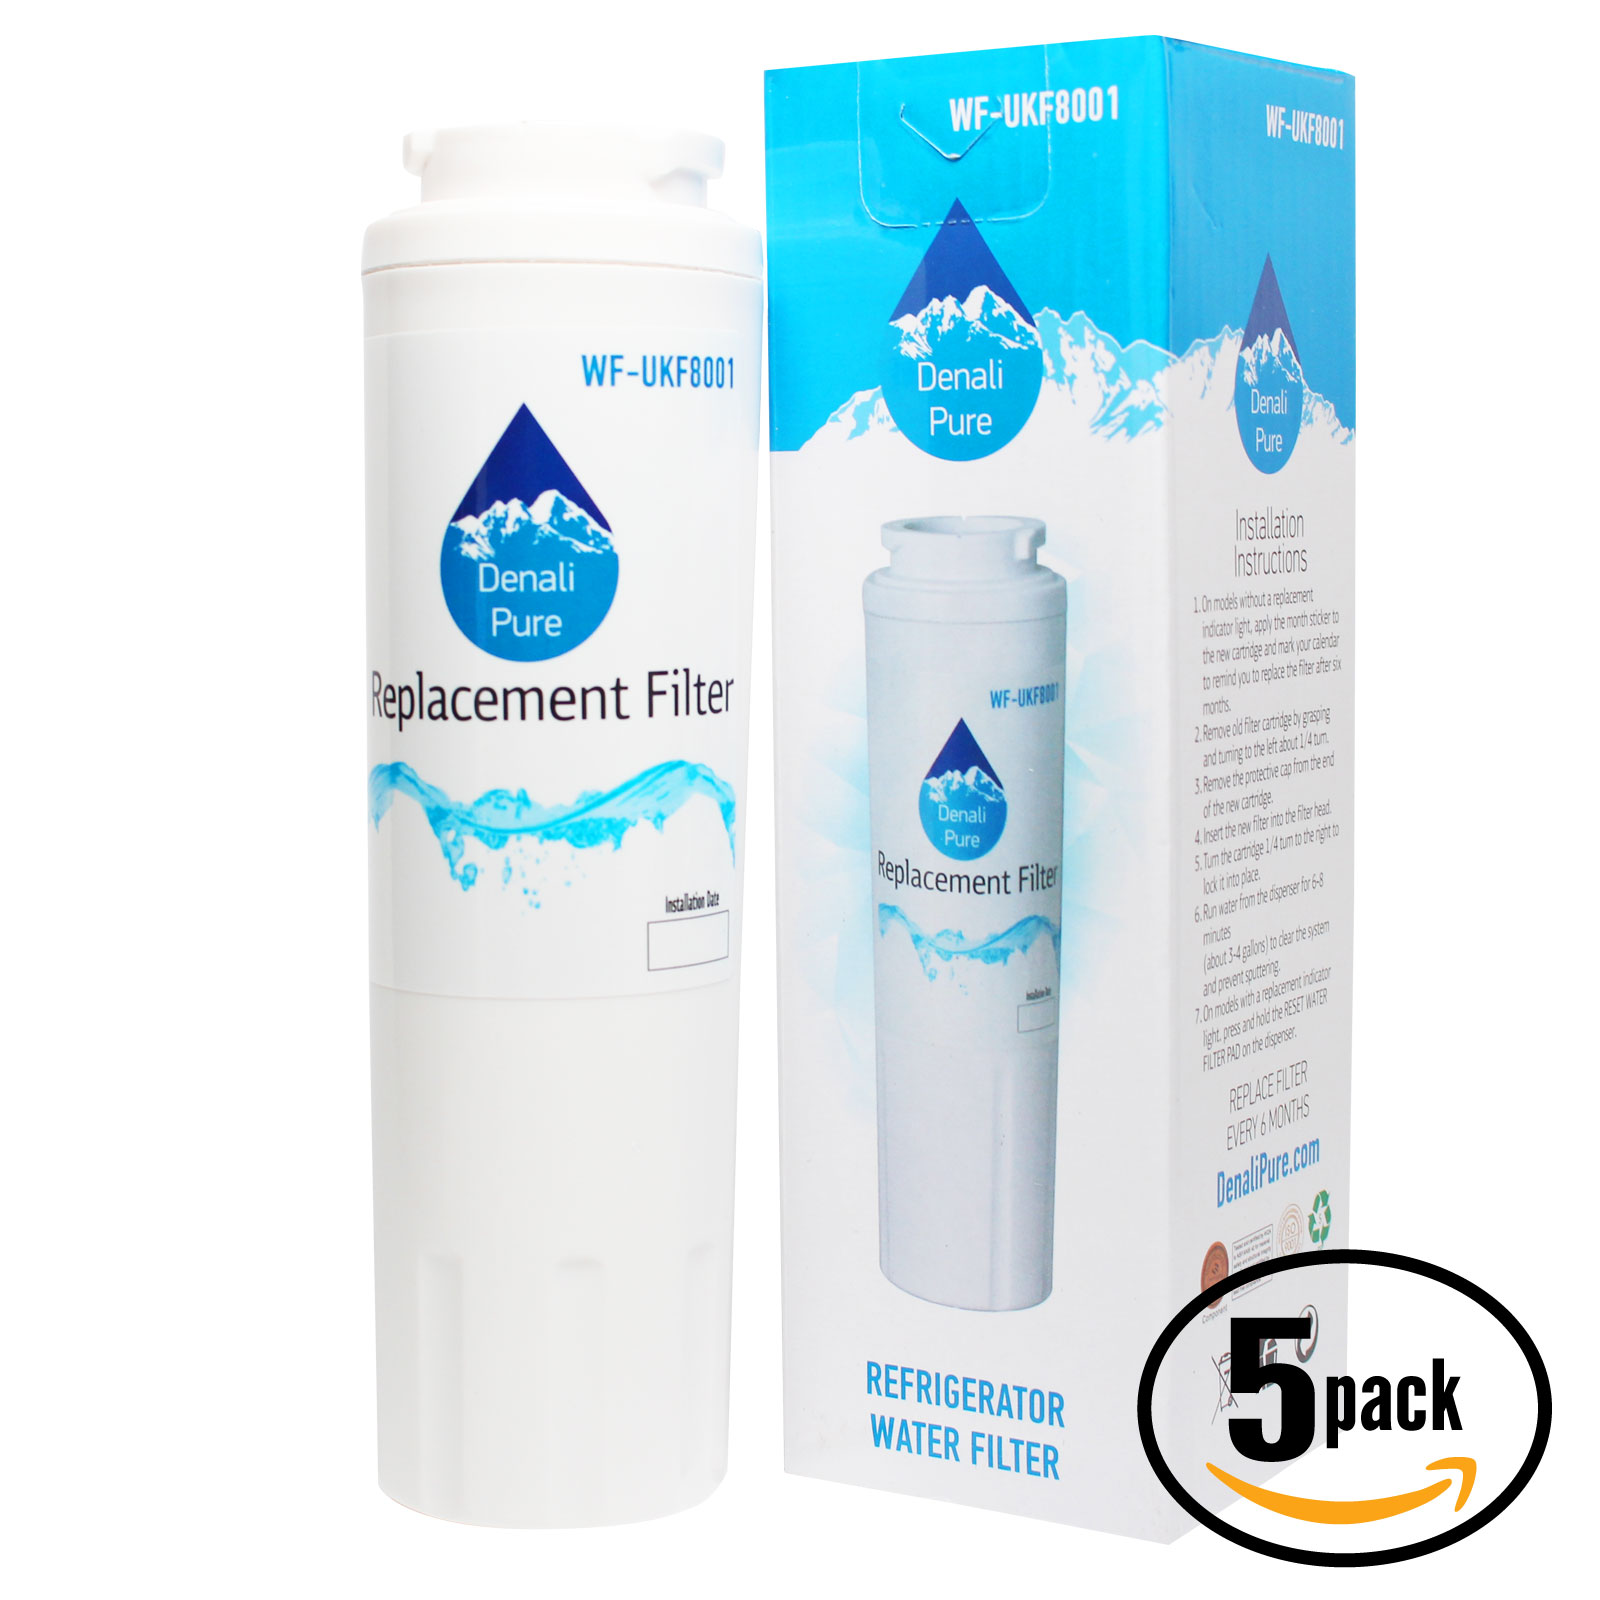 5-Pack Replacement for Amana ARSE67RBC Refrigerator Water Filter - Compatible with Amana UKF8001AXX Fridge Water Filter Cartridge - Denali Pure Brand - image 1 of 4